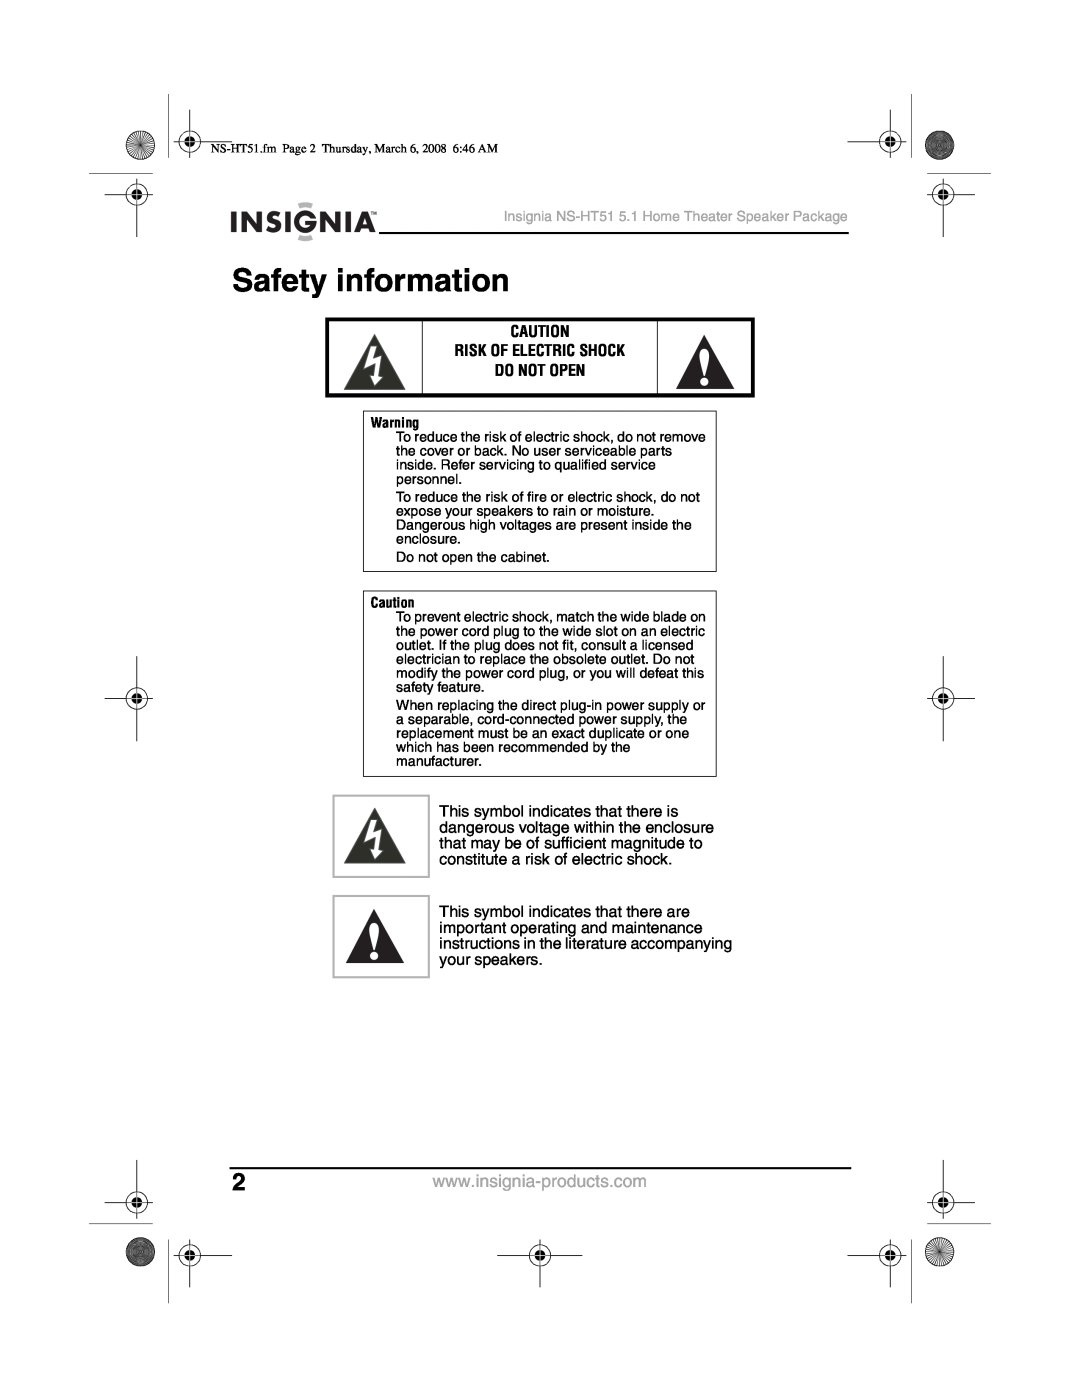 Insignia manual Safety information, Risk Of Electric Shock Do Not Open, Insignia NS-HT515.1 Home Theater Speaker Package 